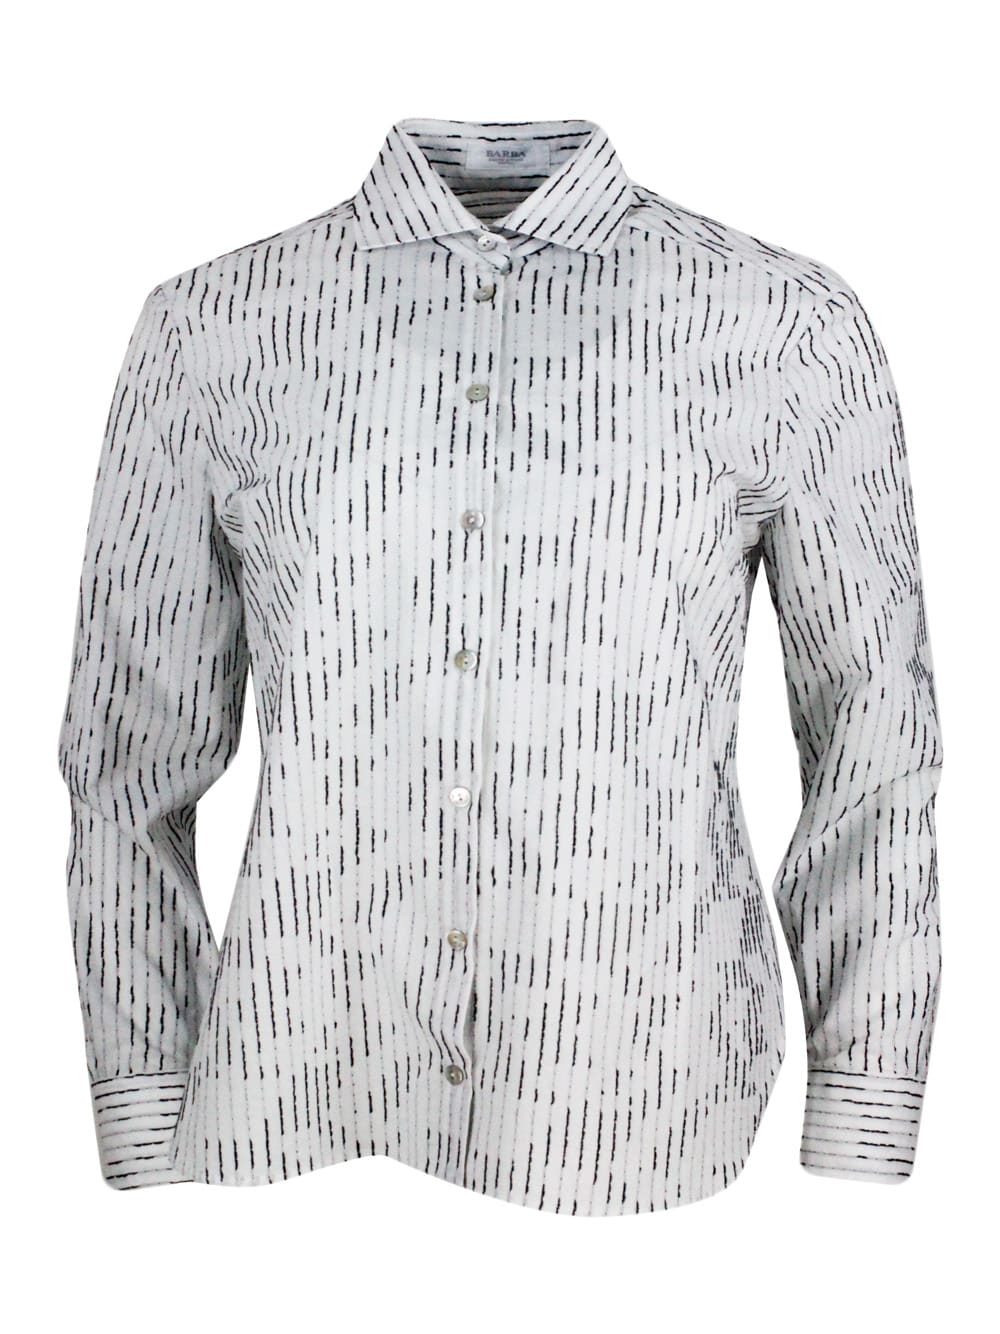 Barba Napoli Long-sleeved Shirt In 100% Soft And Fine Cotton With Raised Vertical Threads. Regular Line In White